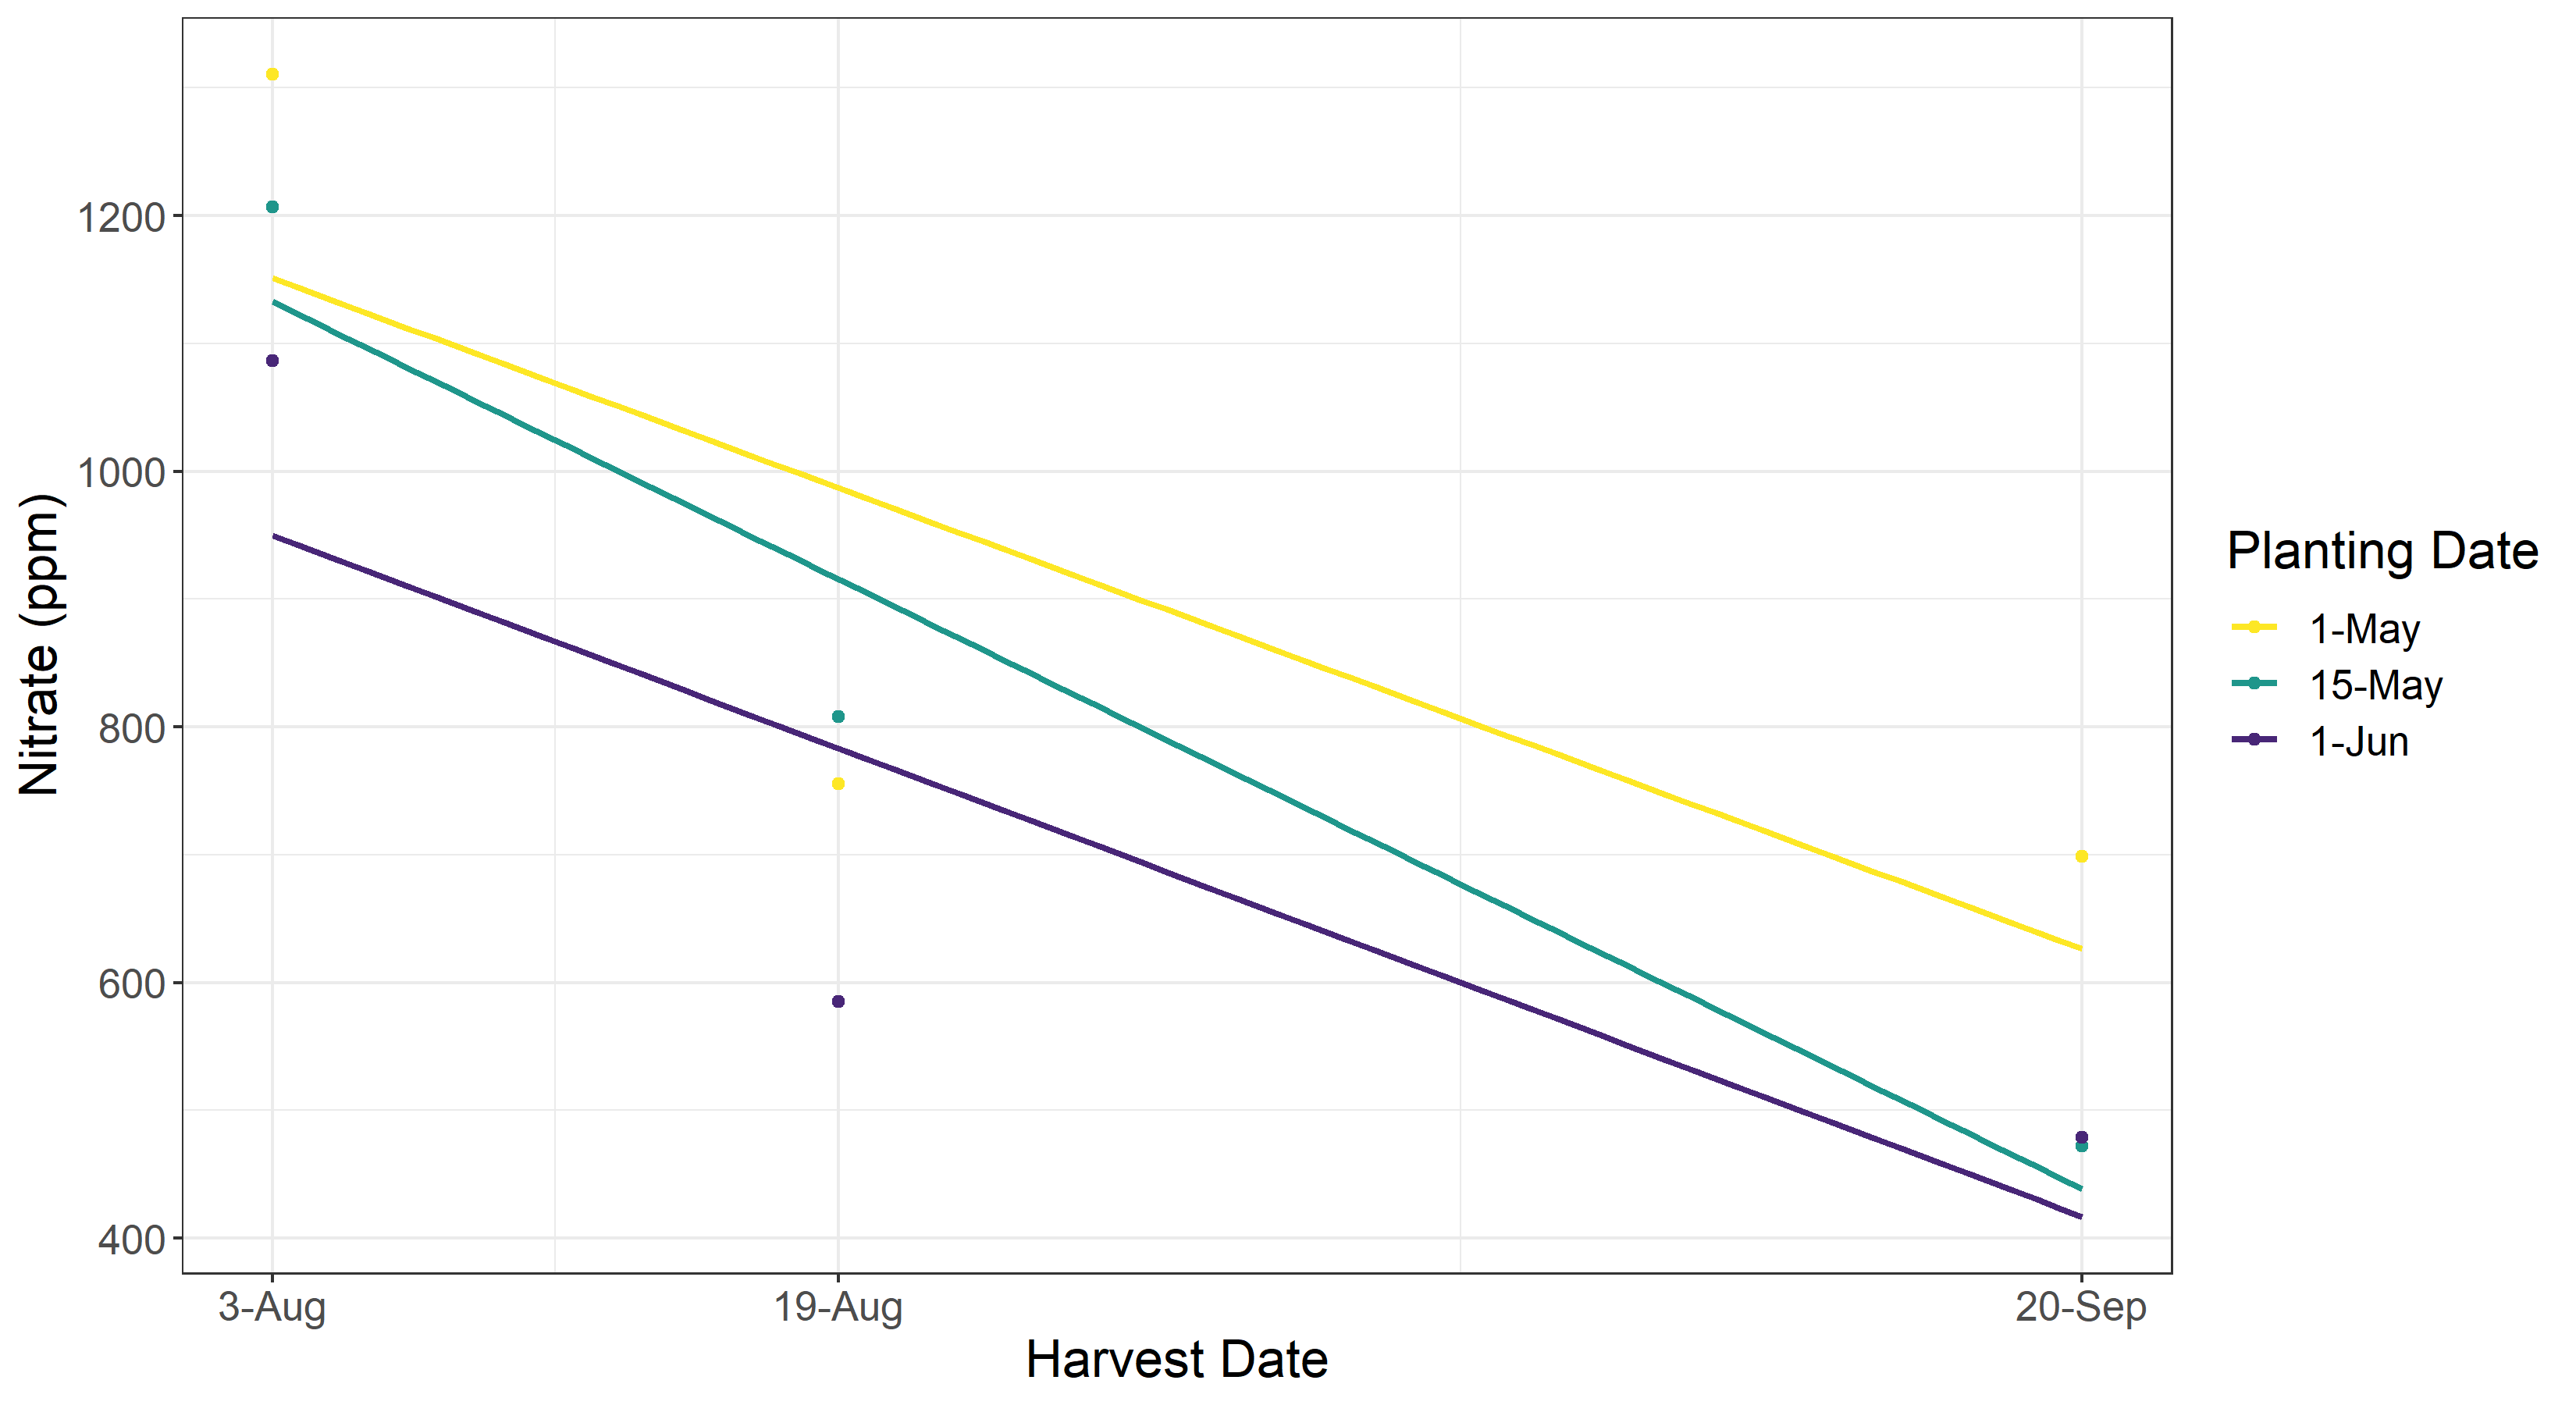 Linear model showing the nitrate ppm based on planting date over the harvest date